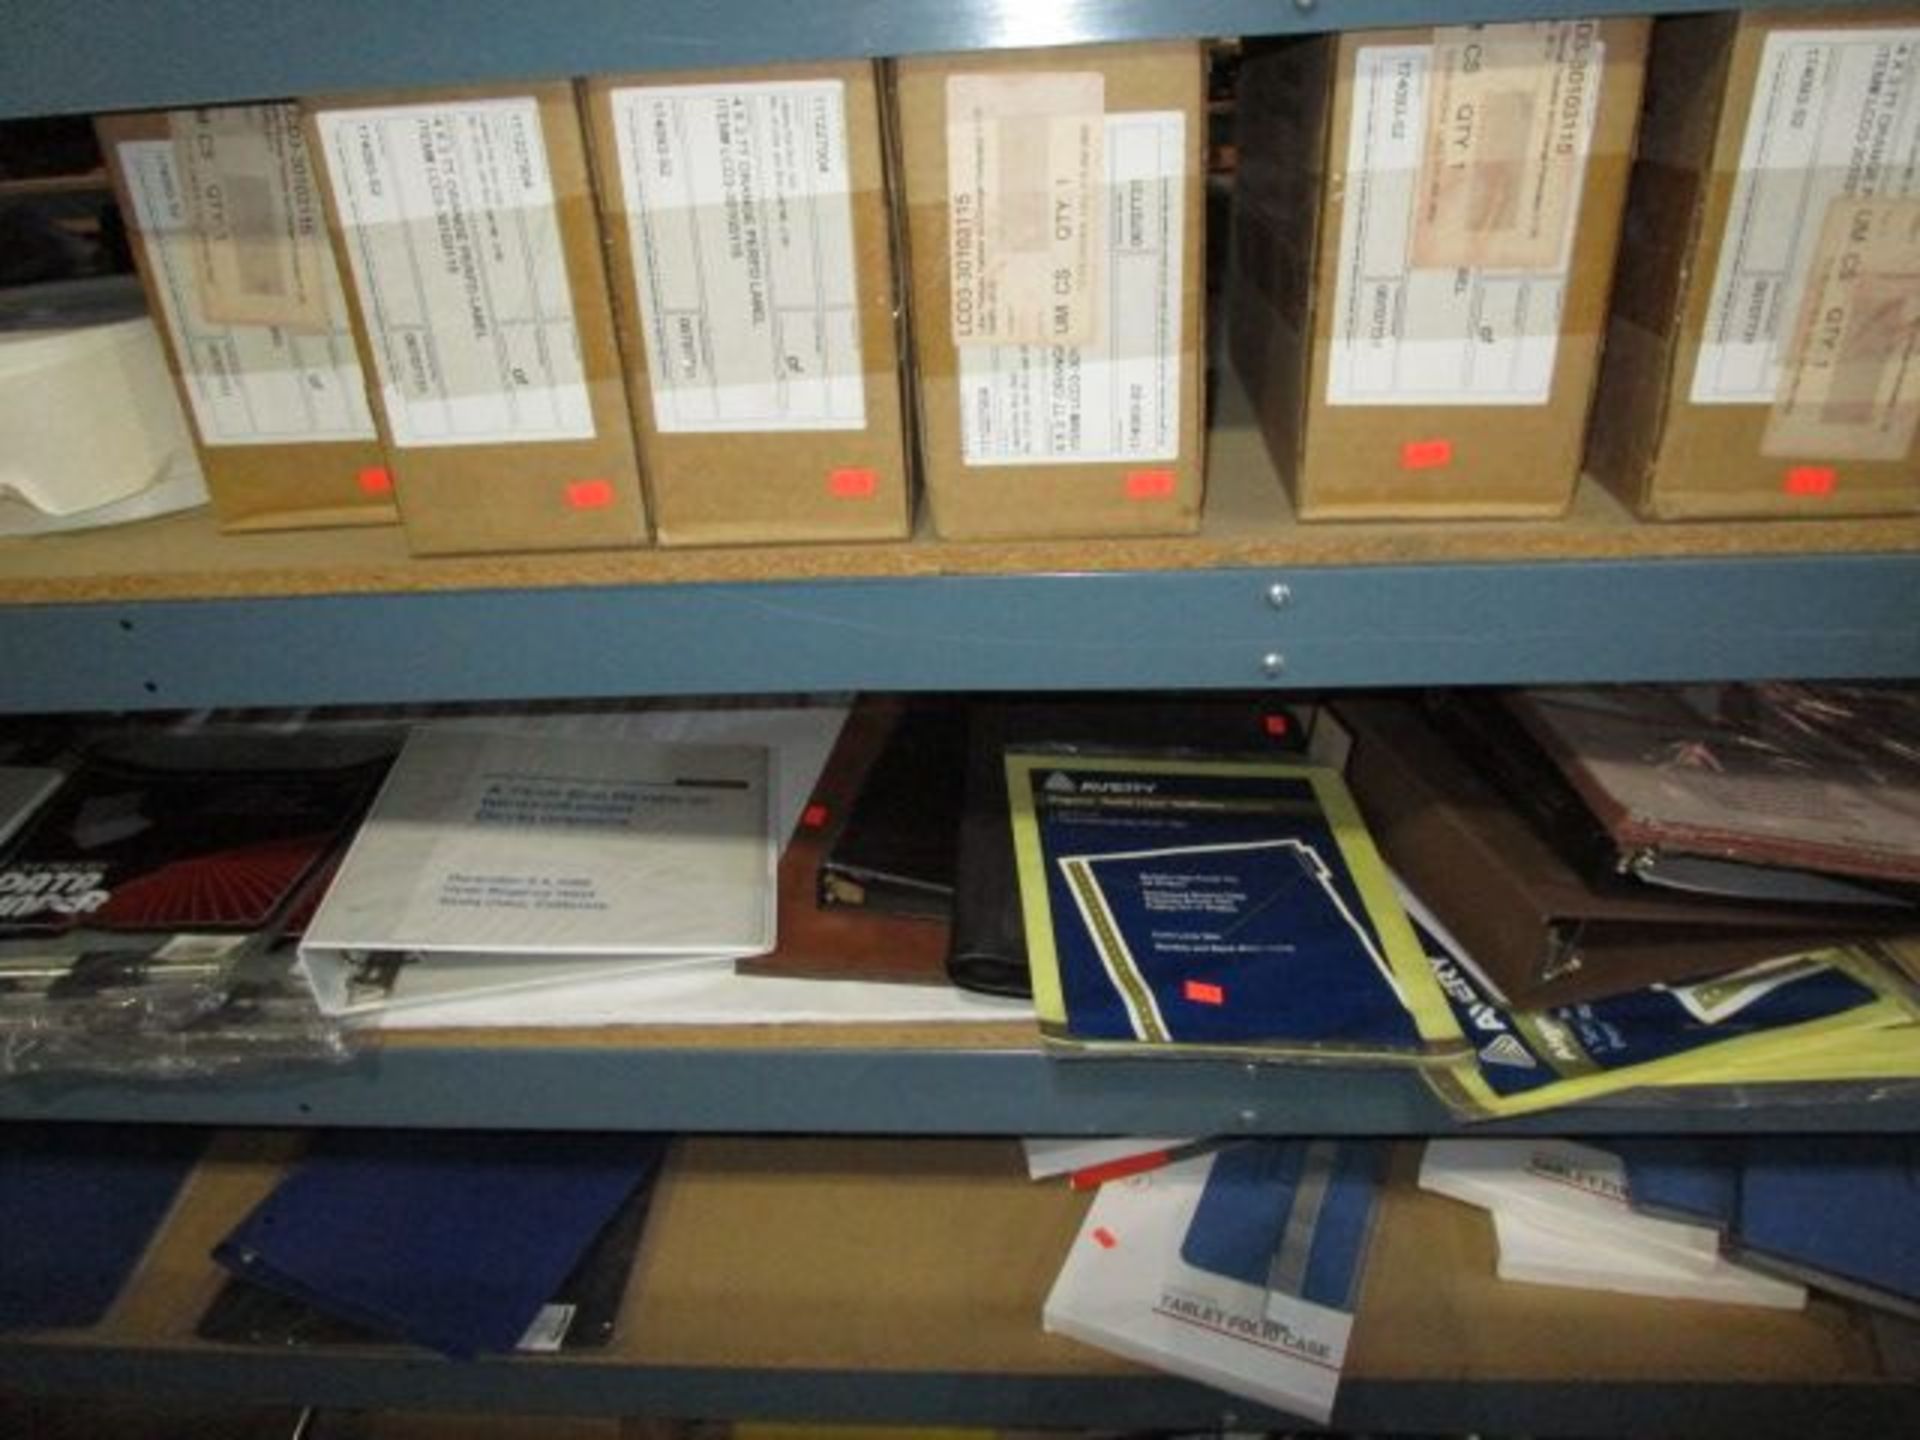 SHELVING UNIT OF ASSORTMENT OF ATTENTION CONES, MARKERS, BINDERS - Image 9 of 14